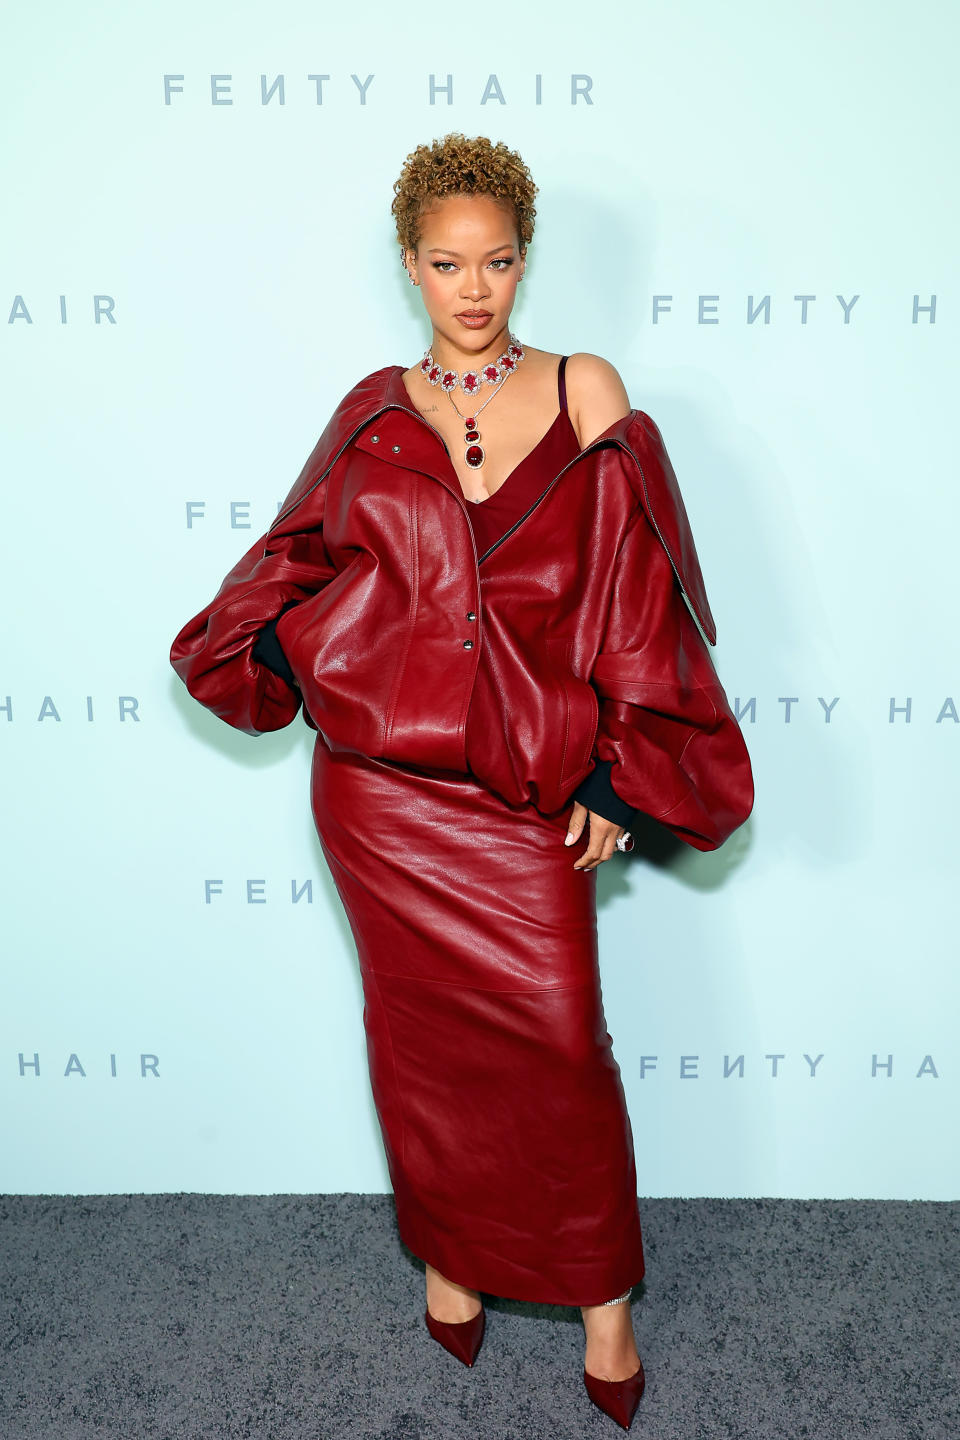 Rihanna wore an all-leather crimson red look by Khaite for her Rihanna x Fenty Hair Los Angeles Launch Party at Nya Studios on June 10. (Photo by Leon Bennett/Getty Images)